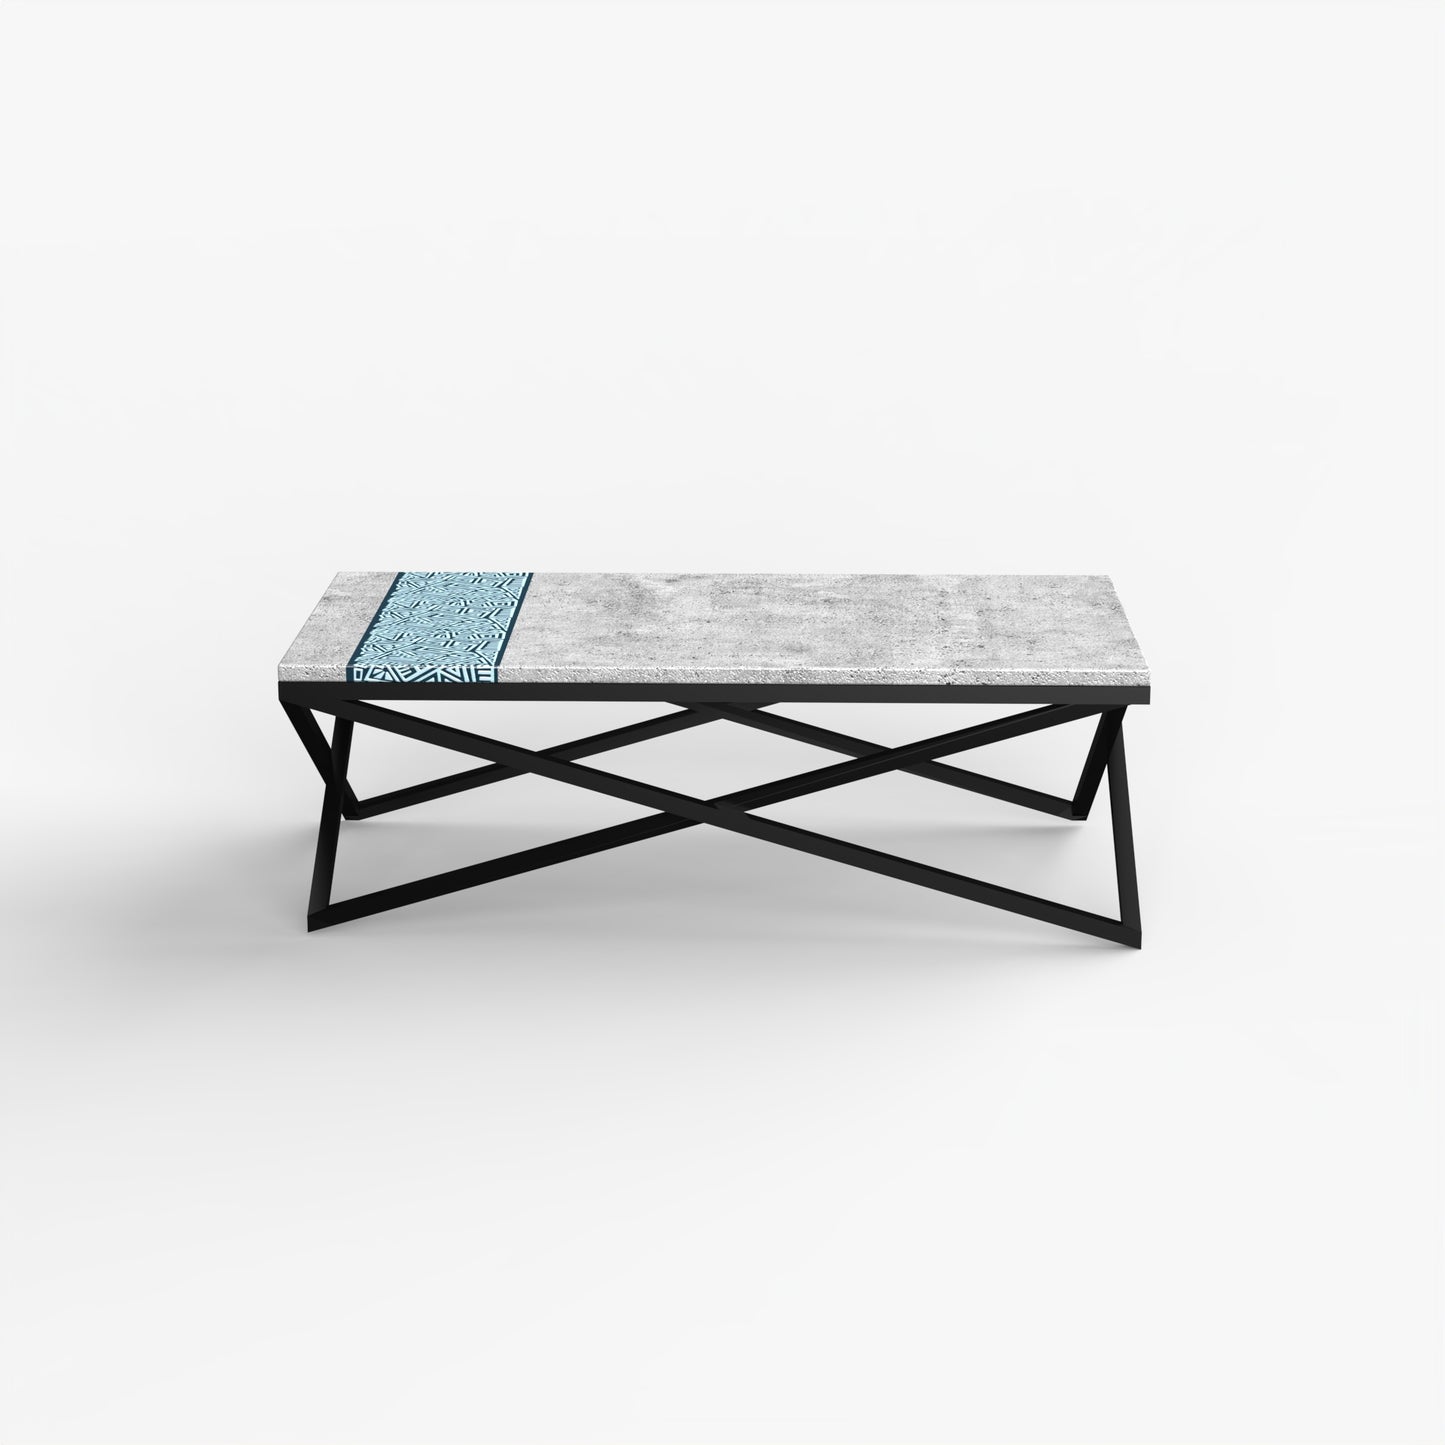 Ìbùkún coffee table is a highly durable, sustainable, minimalist, hand-made piece of furniture. It’s made of lightweight concrete with a matt black metal base. It comes in two creative designs. (Natural Plain Concrete furniture and Patterned Concrete furniture). Proudly made in Nigeria for Africa.